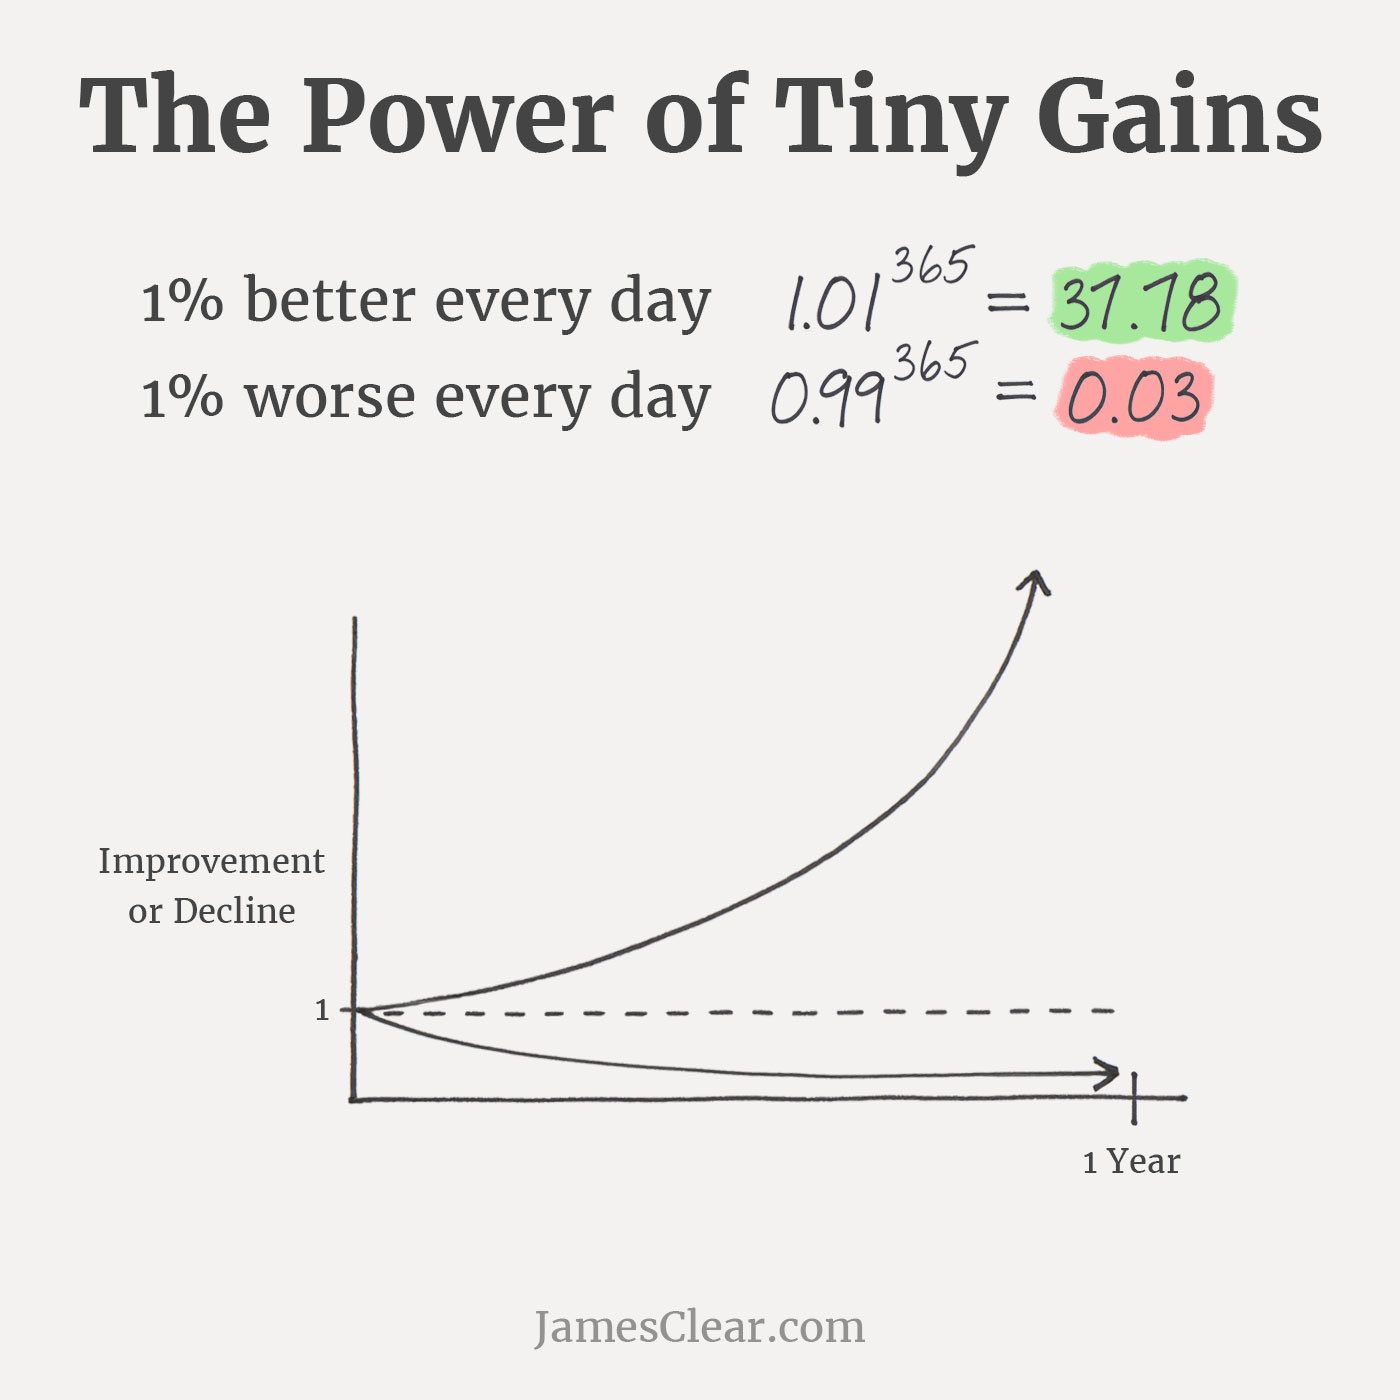 You sustained a 1% improvement every day for 365 days in a row. And then you woke up.